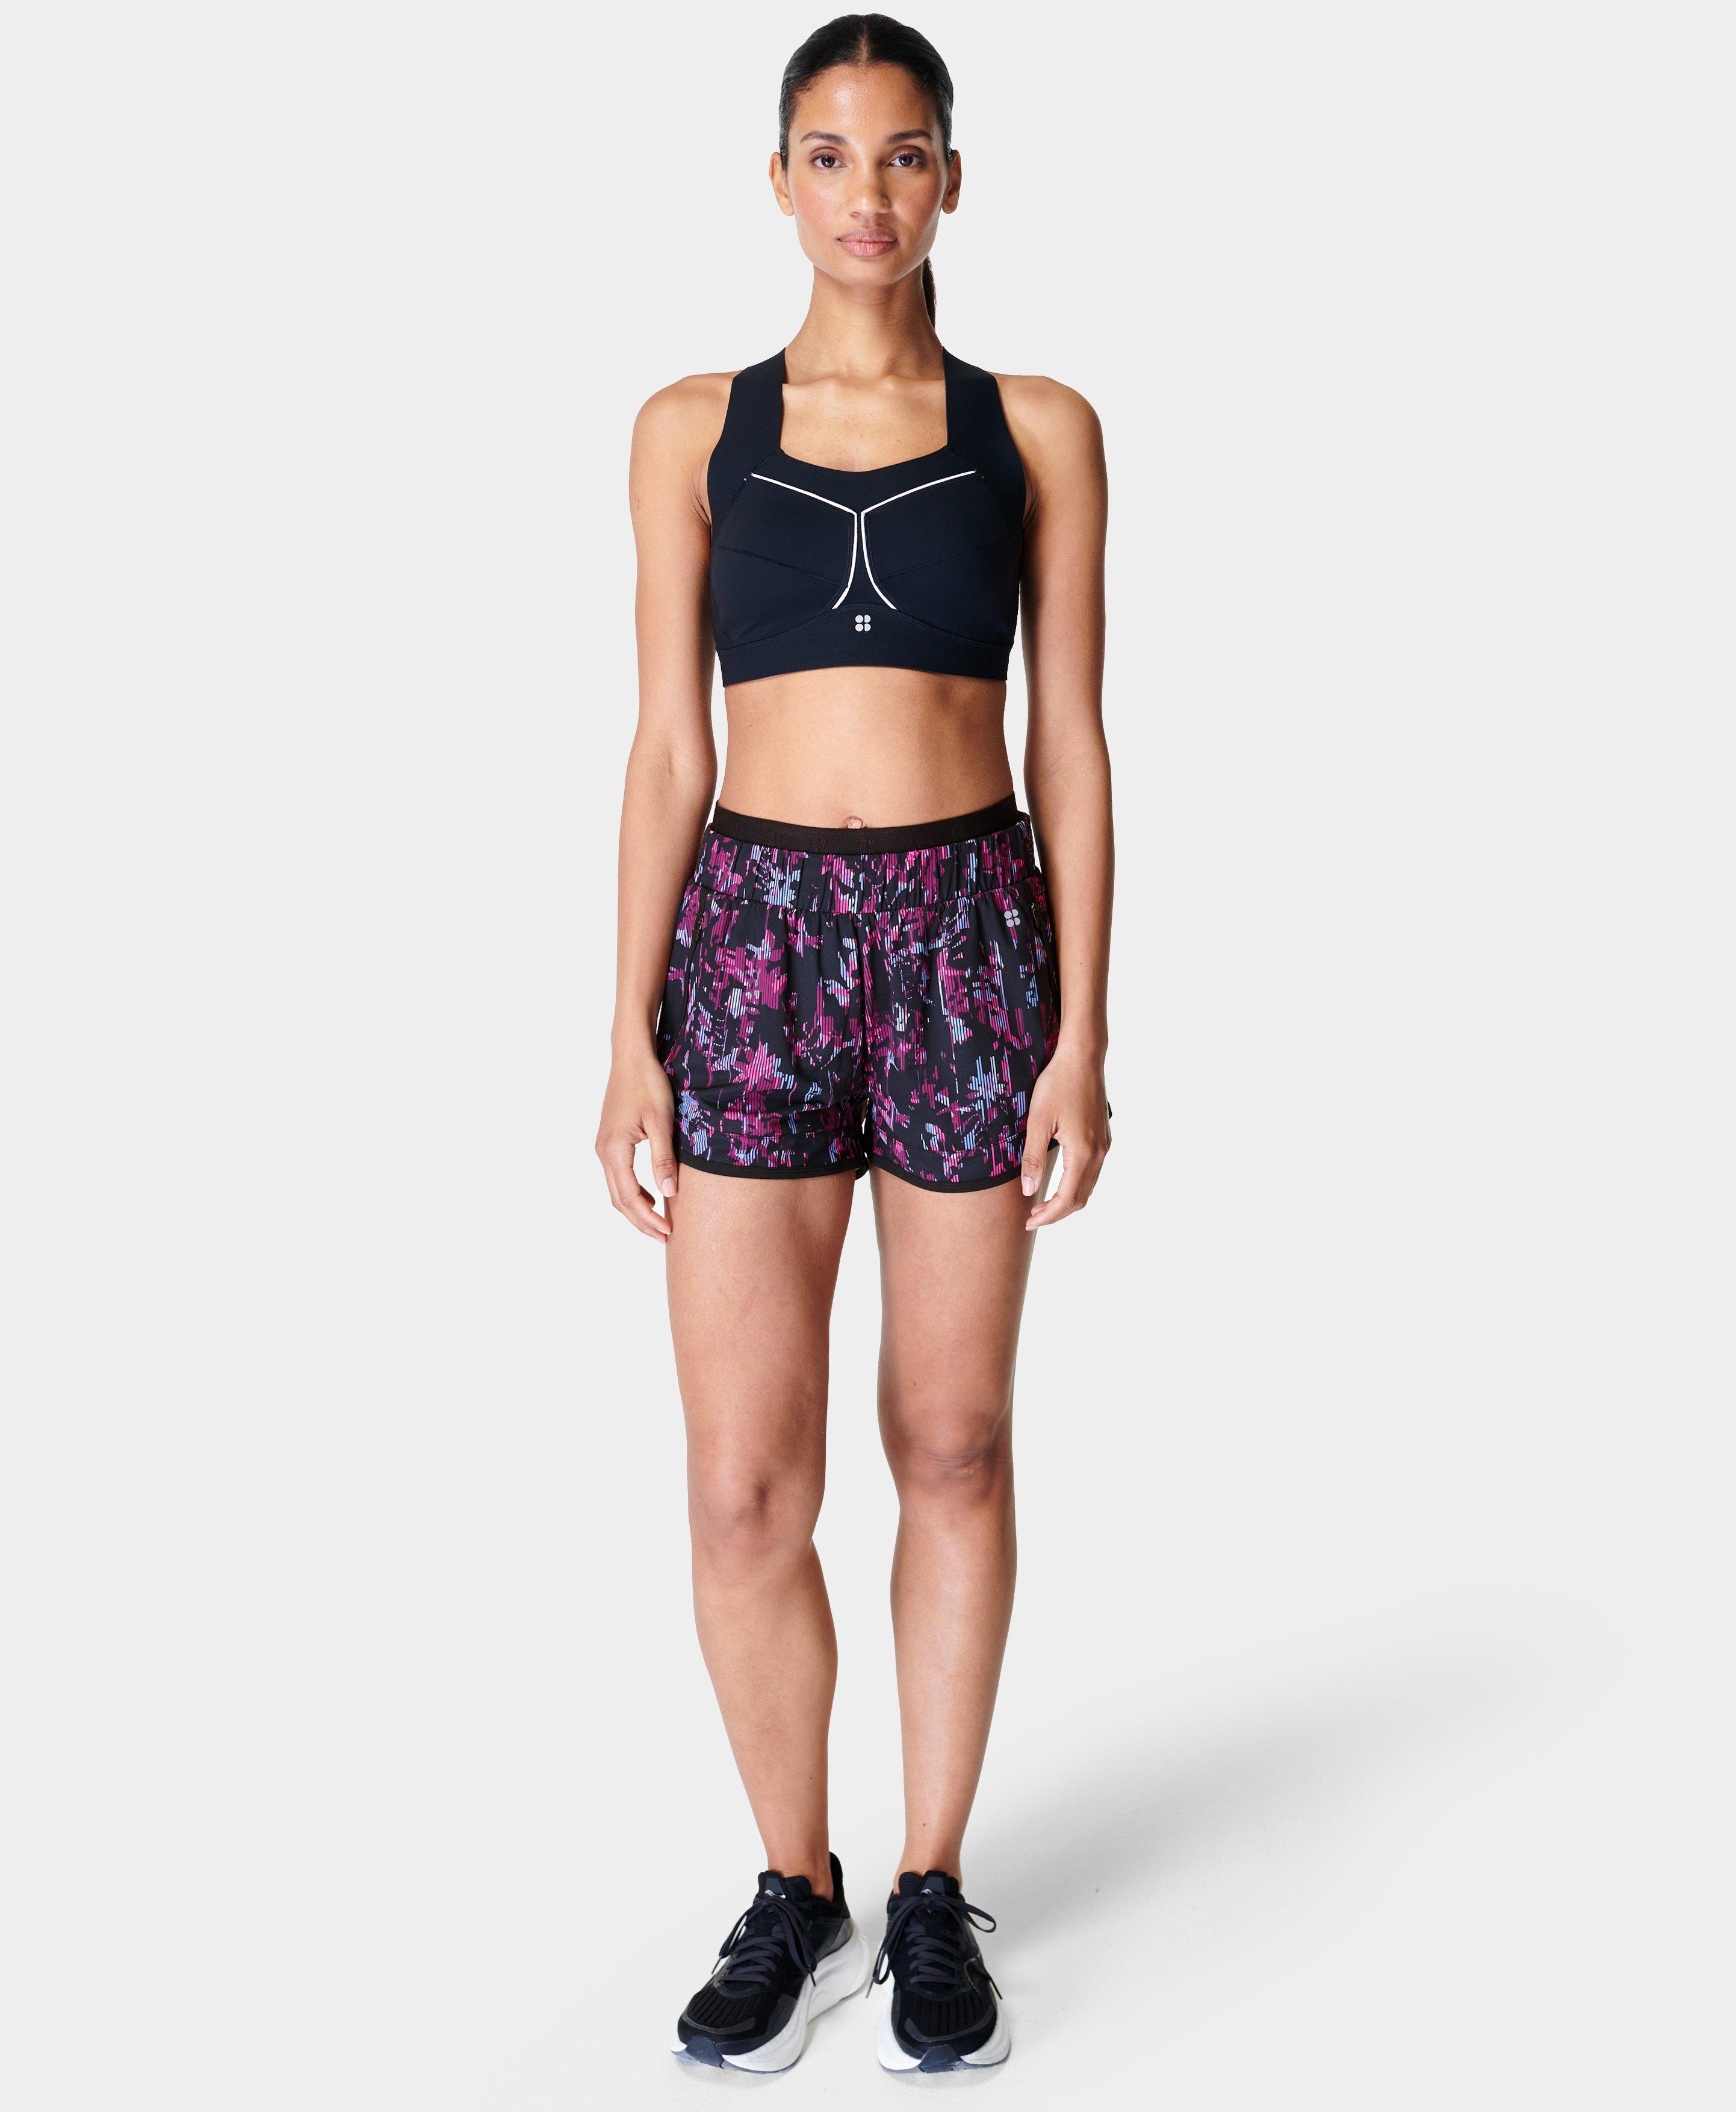 On Your Marks 4” Running Shorts - Pink Floral Glitch Print, Women's Shorts  & Skorts